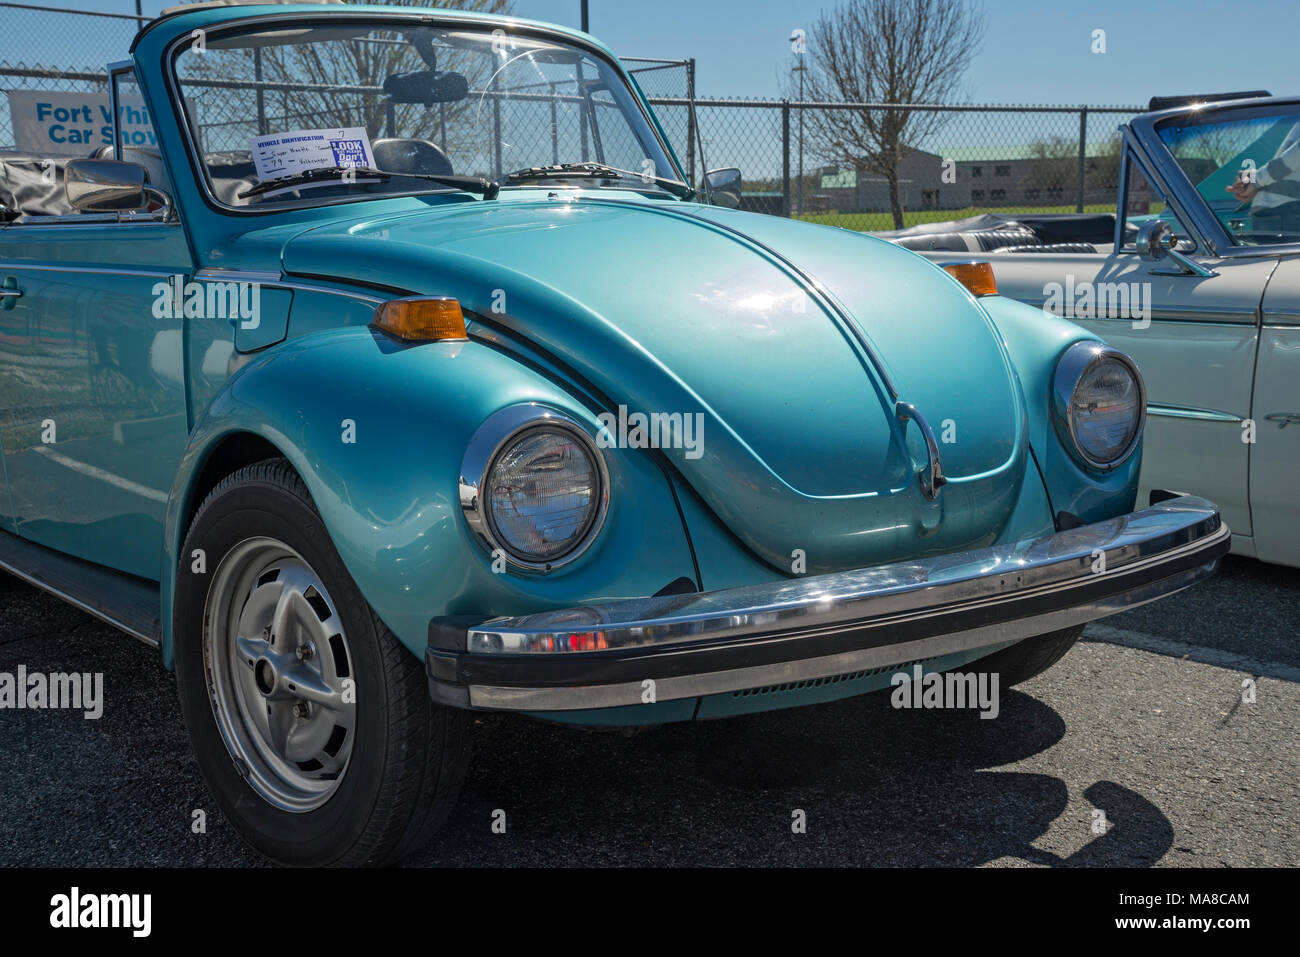 Car Show in Ft. White, Florida. 1979 Volkswagen Super Beetle Convertible. Stock Photo